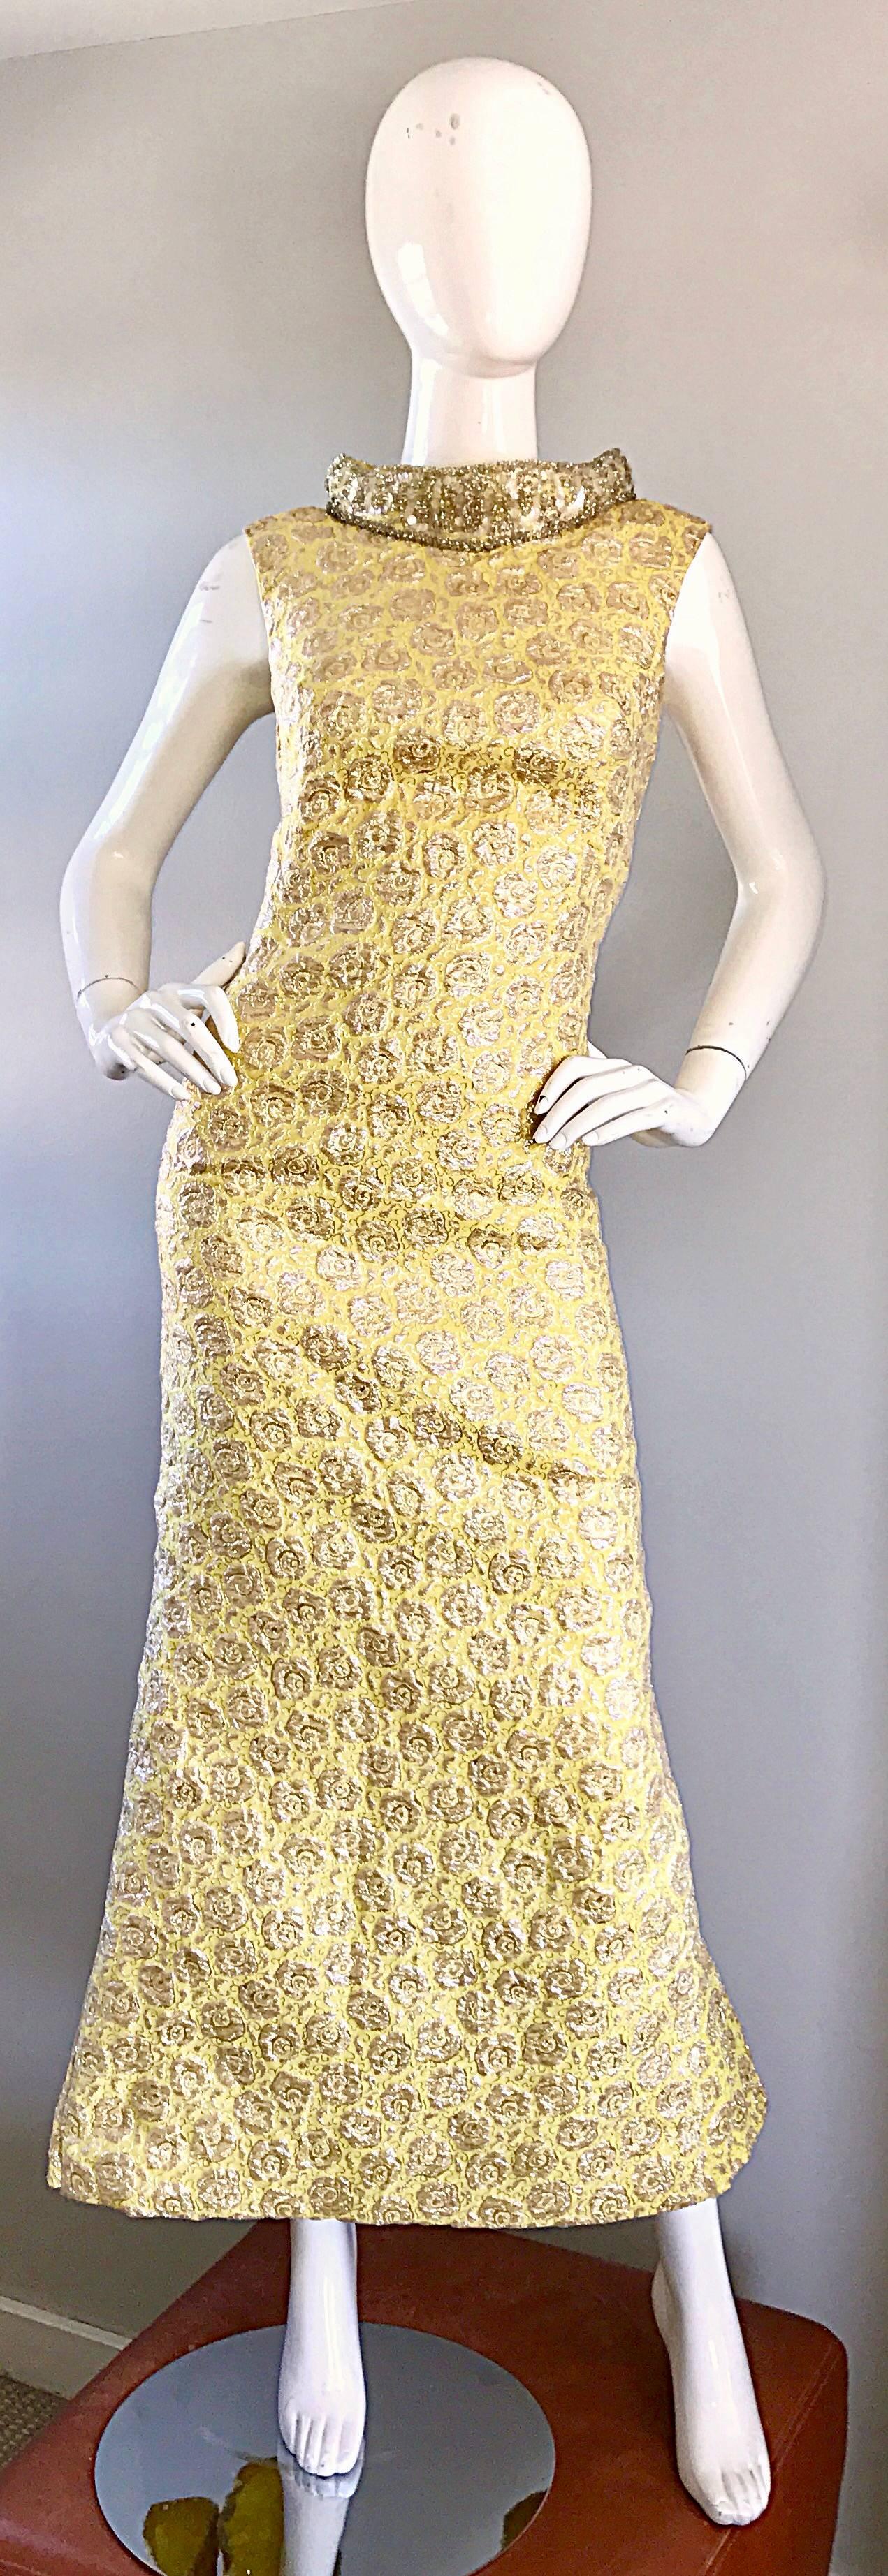 Showstopping 50s demi couture mermaid evening dress! Vibrant yellow and gold silk brocade. Features a dramatic sequined and beaded high collar. Fitted bodice, with a flared skirt. Back skirt also features a strip of sequins and beads above the